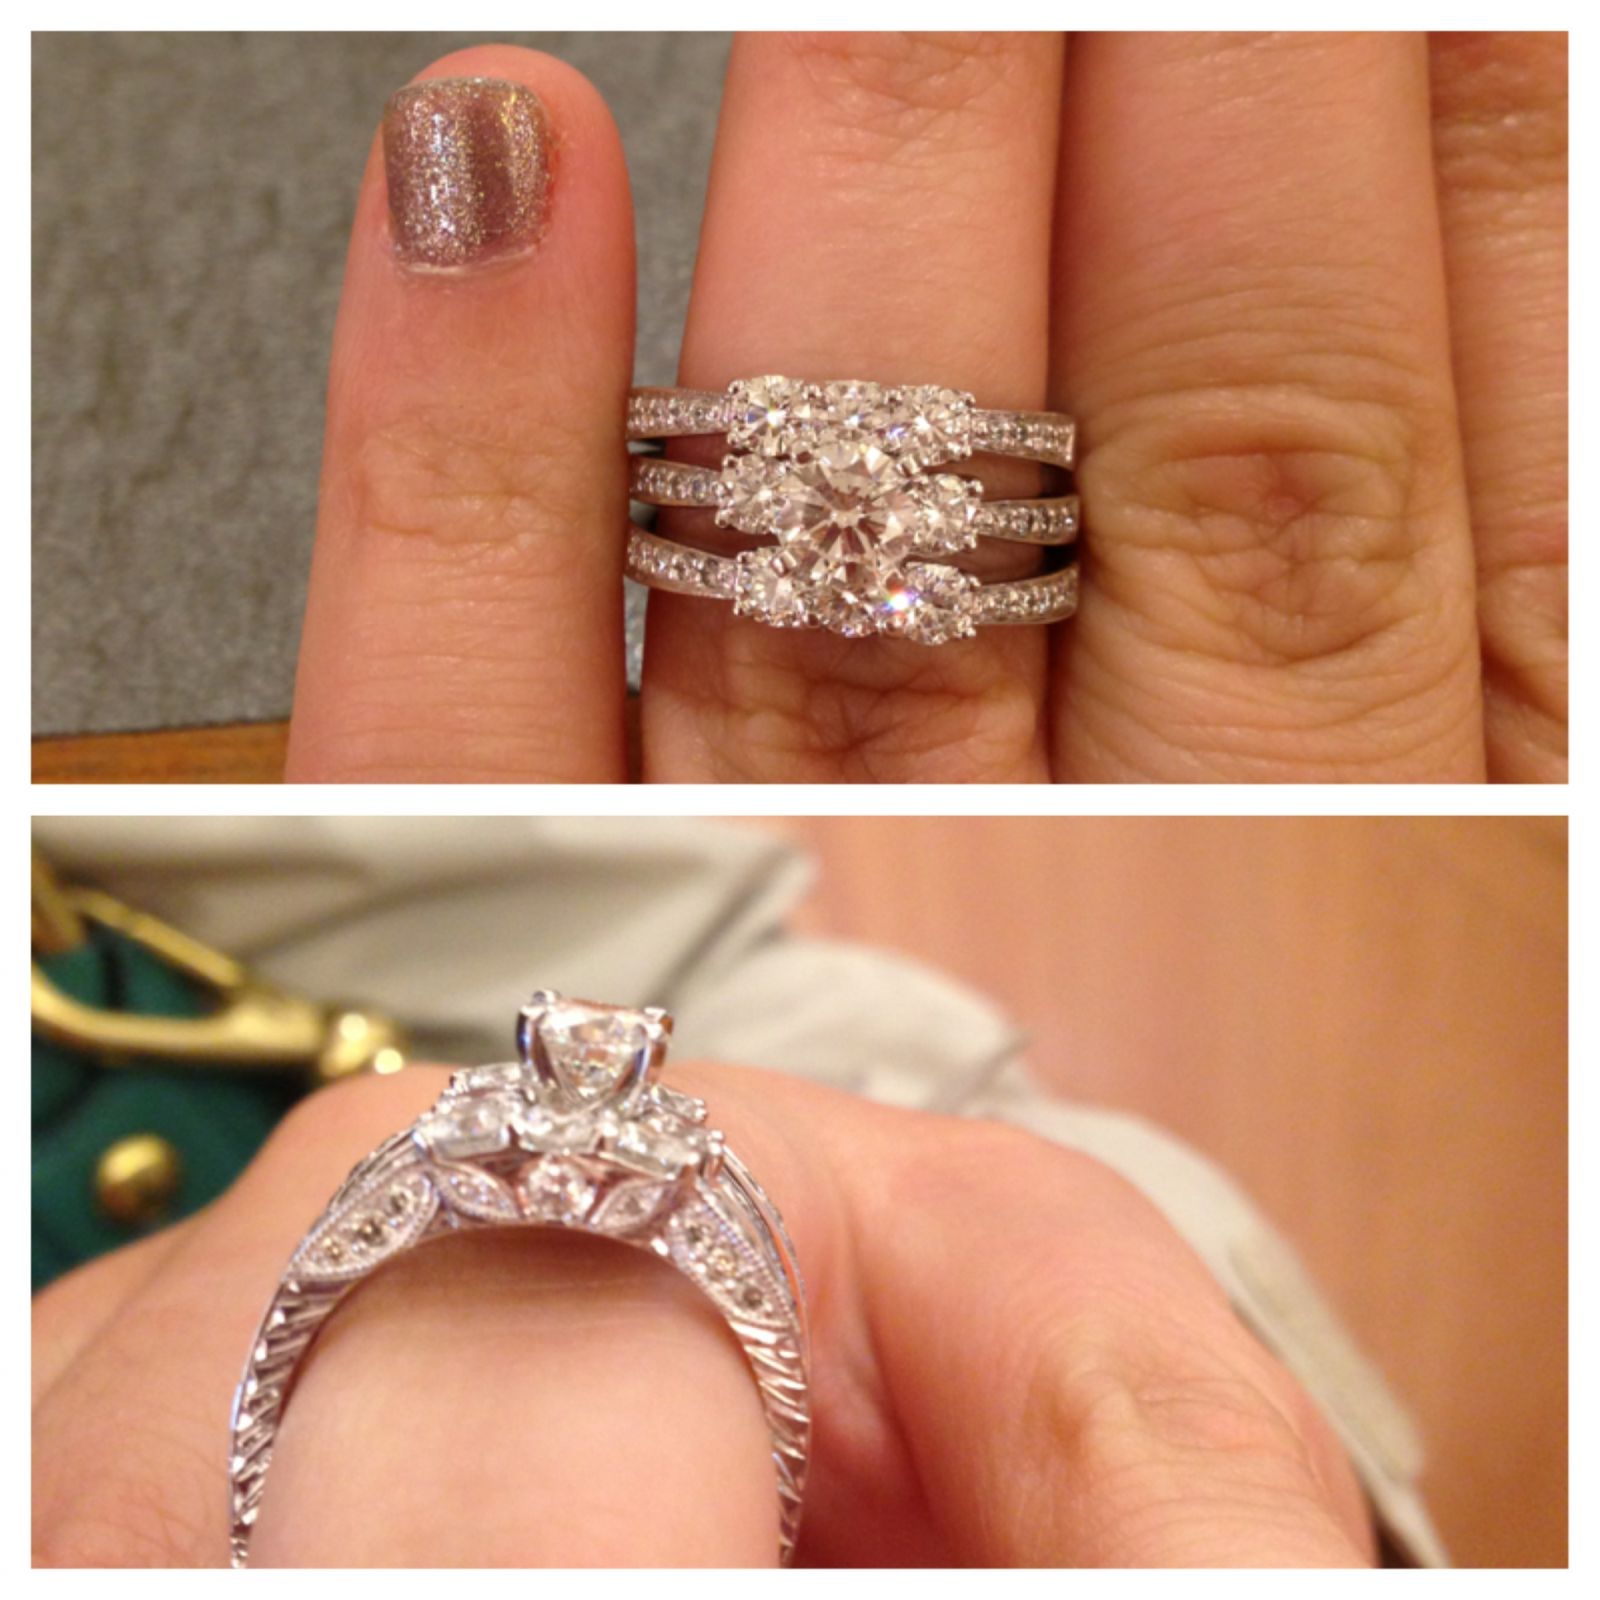 show us your rings!